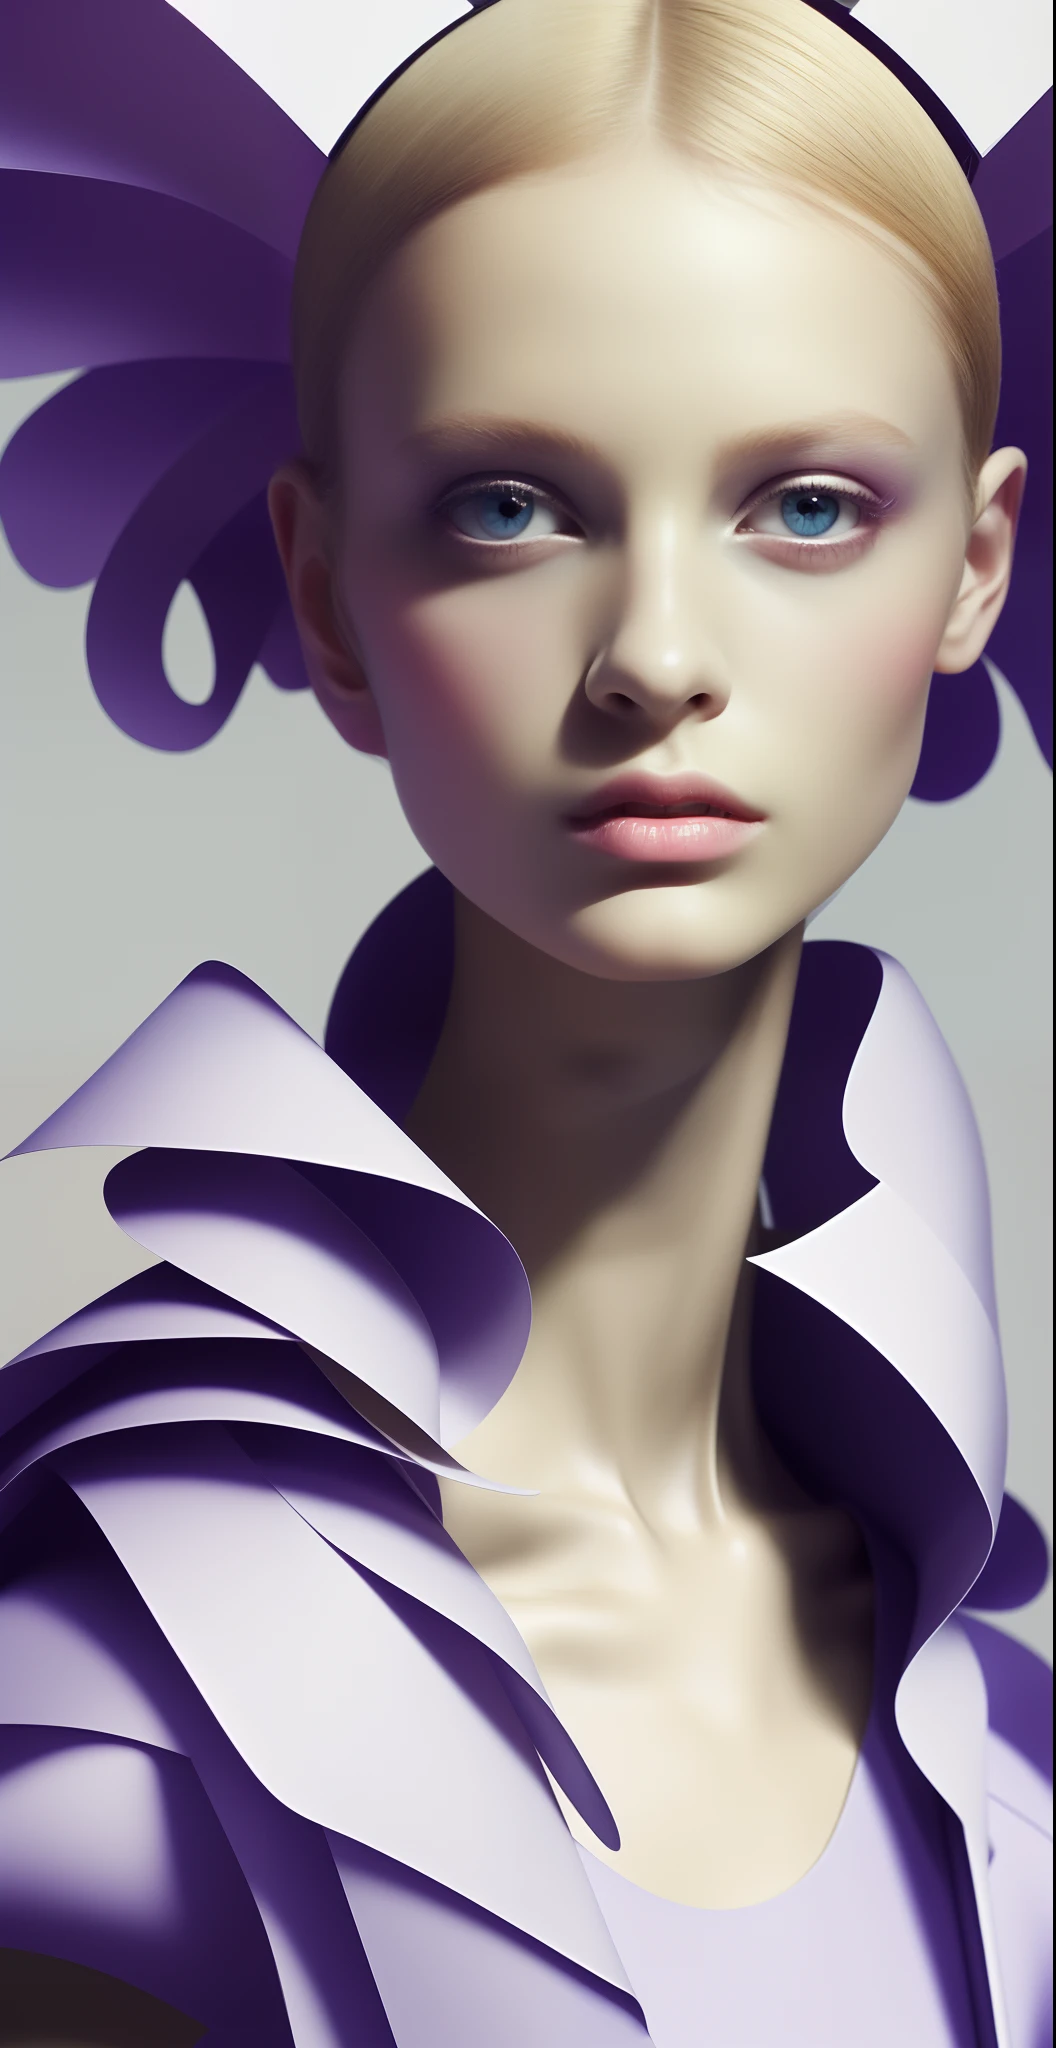 Girl. Every detail is perfect. high-quality photo. Nick Knight --V 5 --AR